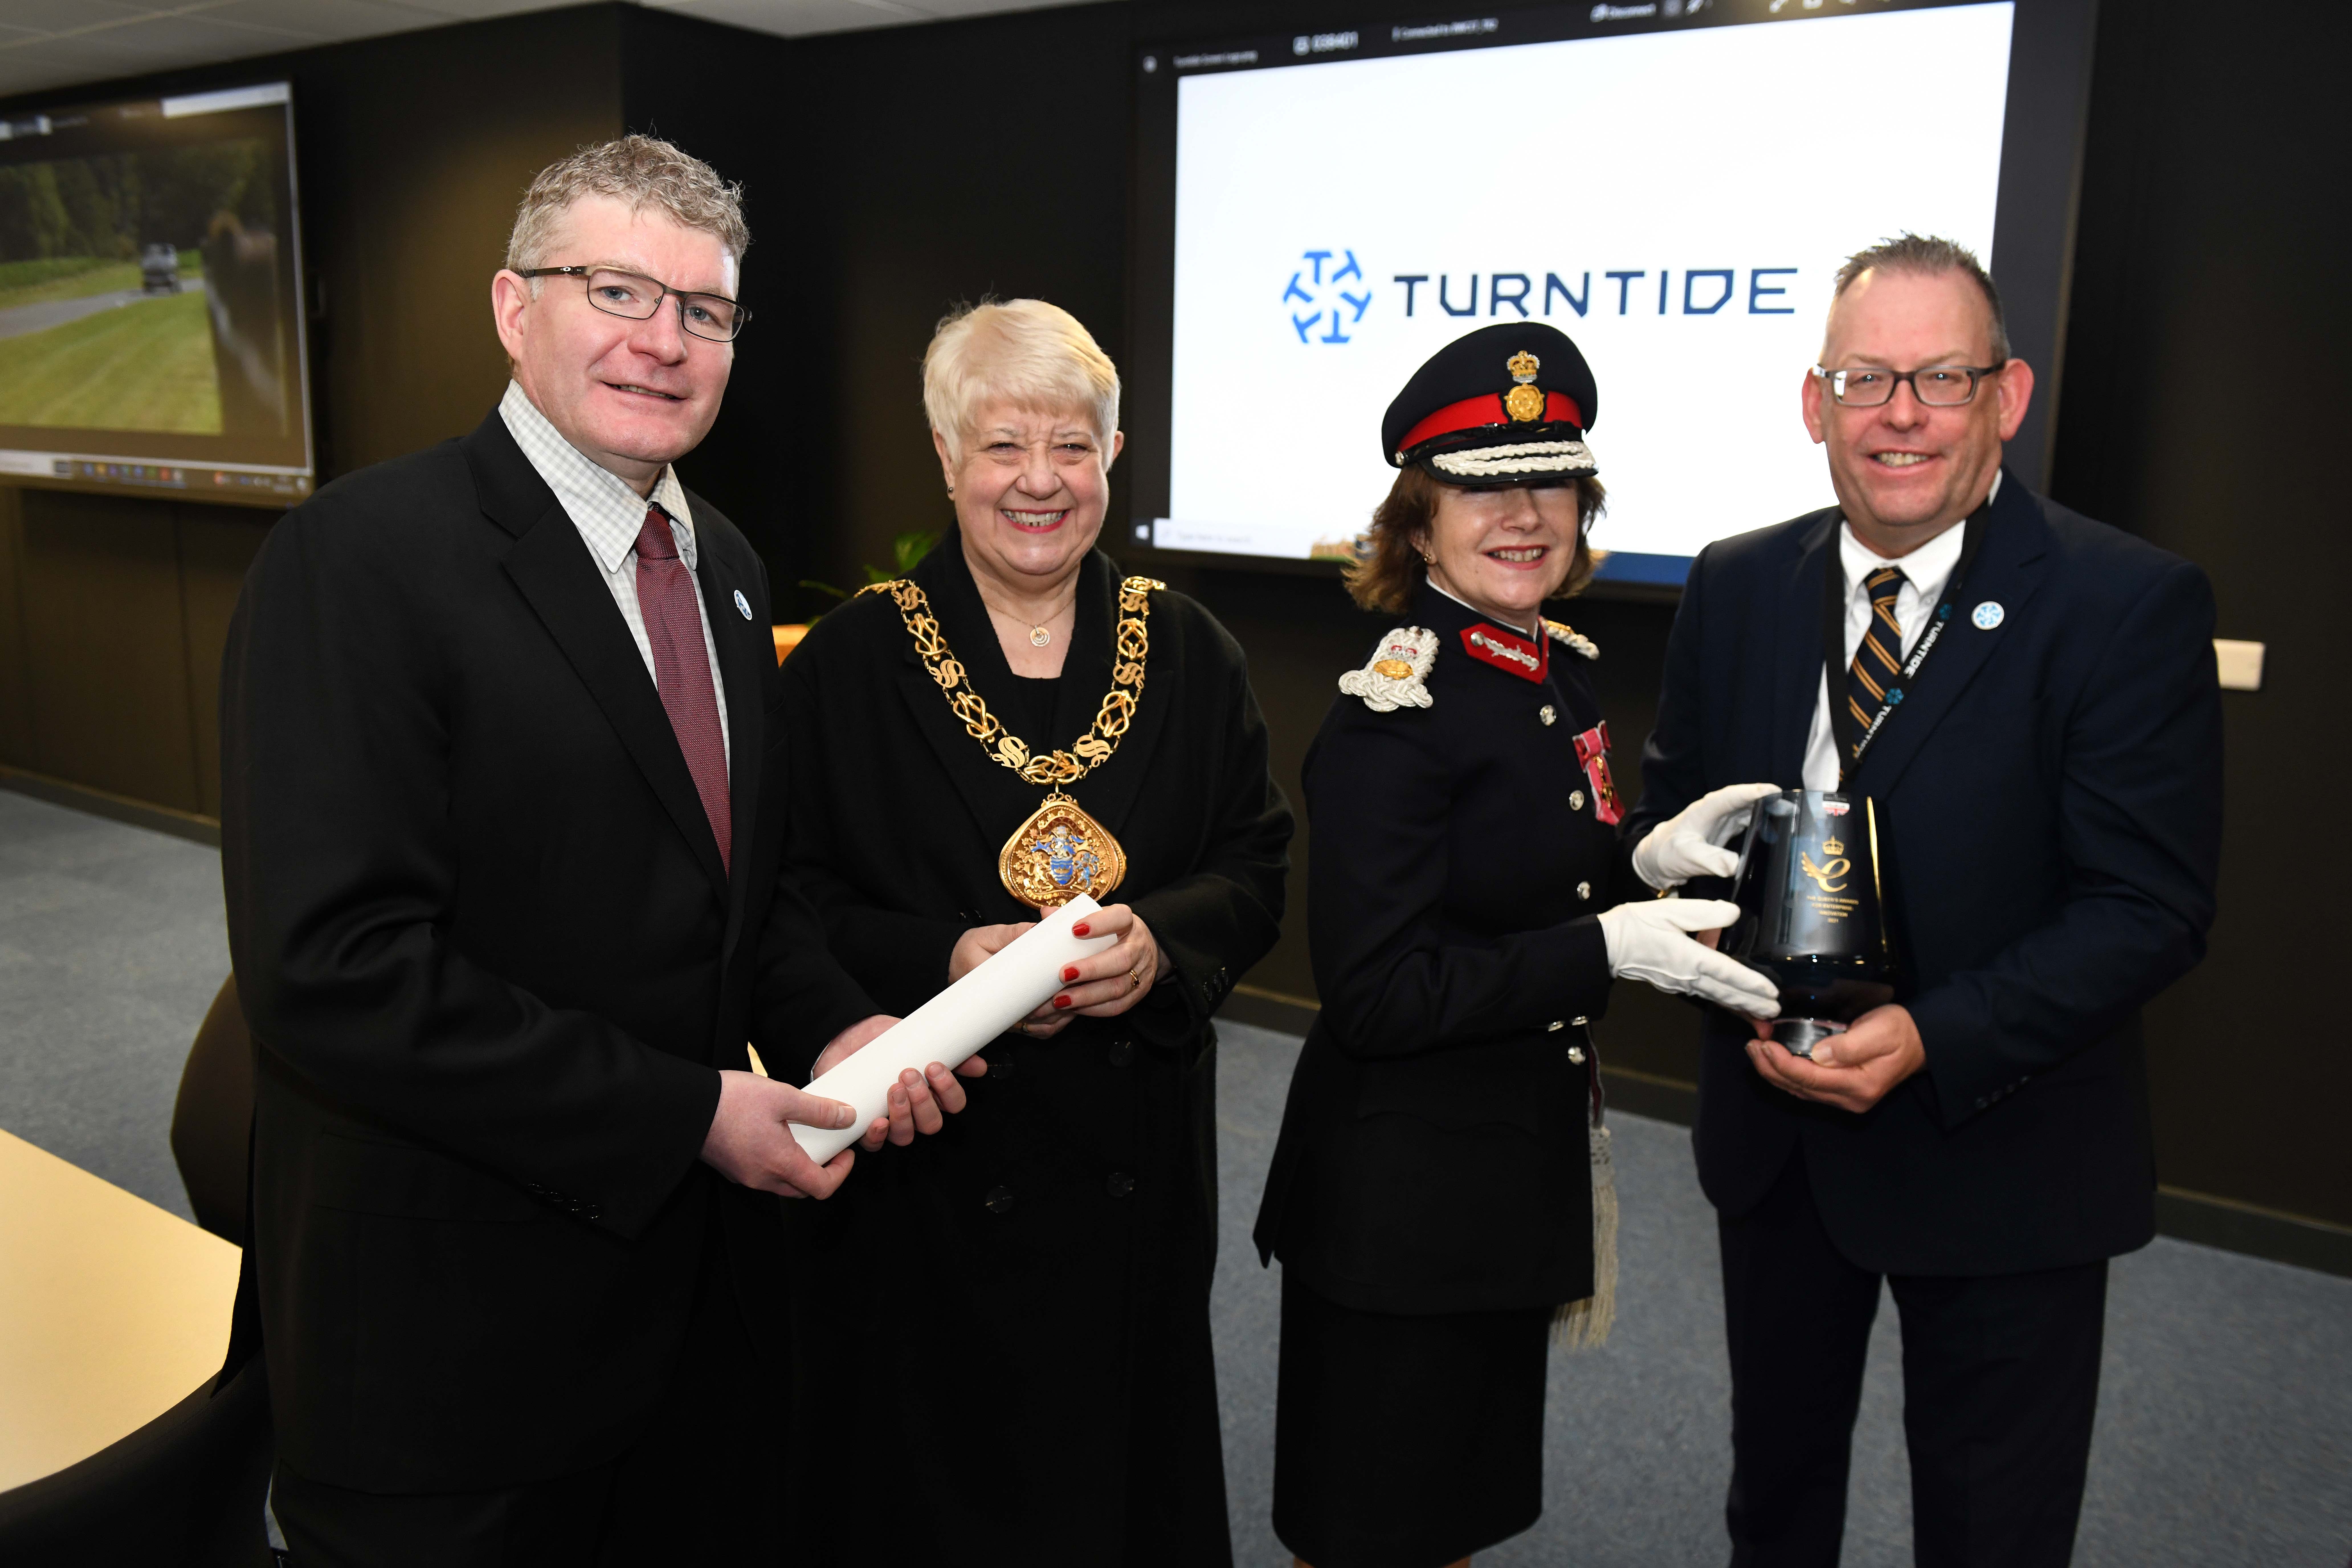 Turntide Presented With "Queen’s Award for Enterprise" for Its Hyperdrive Battery Technology 35